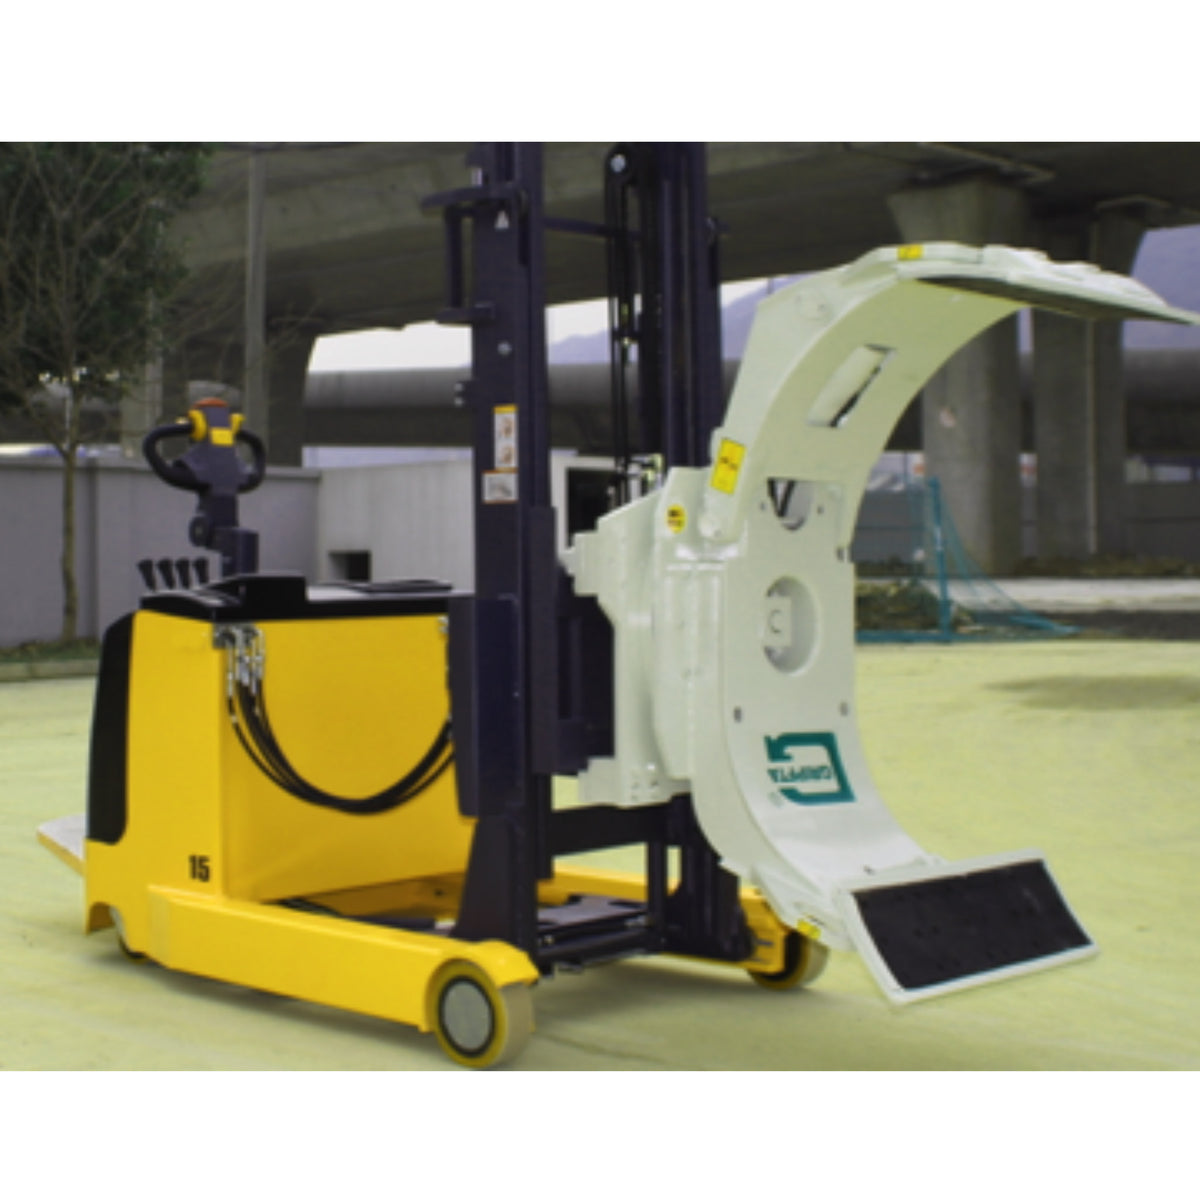 reach fork lift and clamp